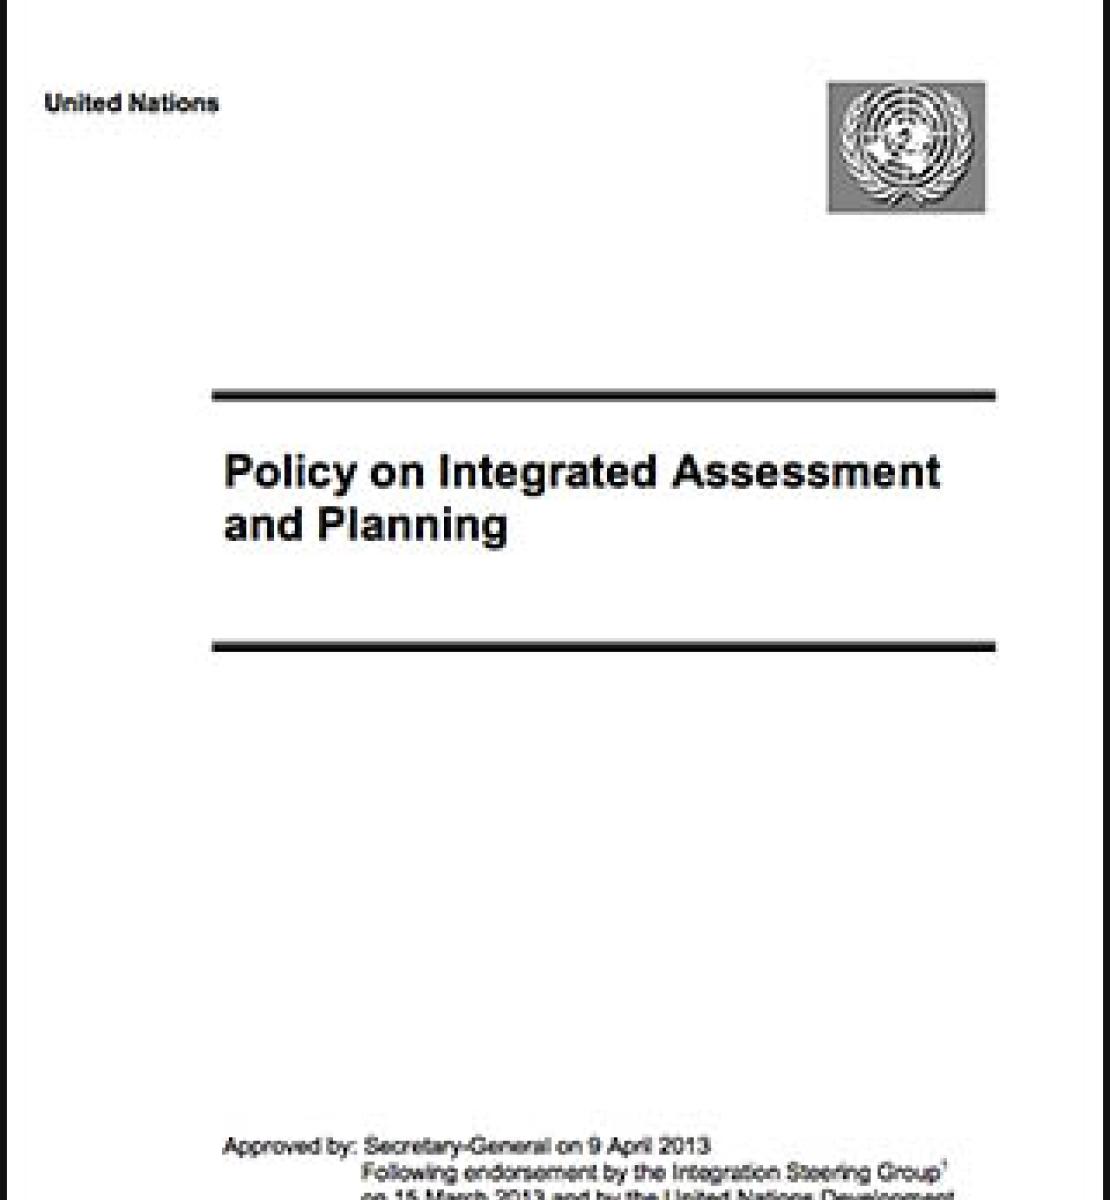 UN Policy on Integrated Assessment and Planning